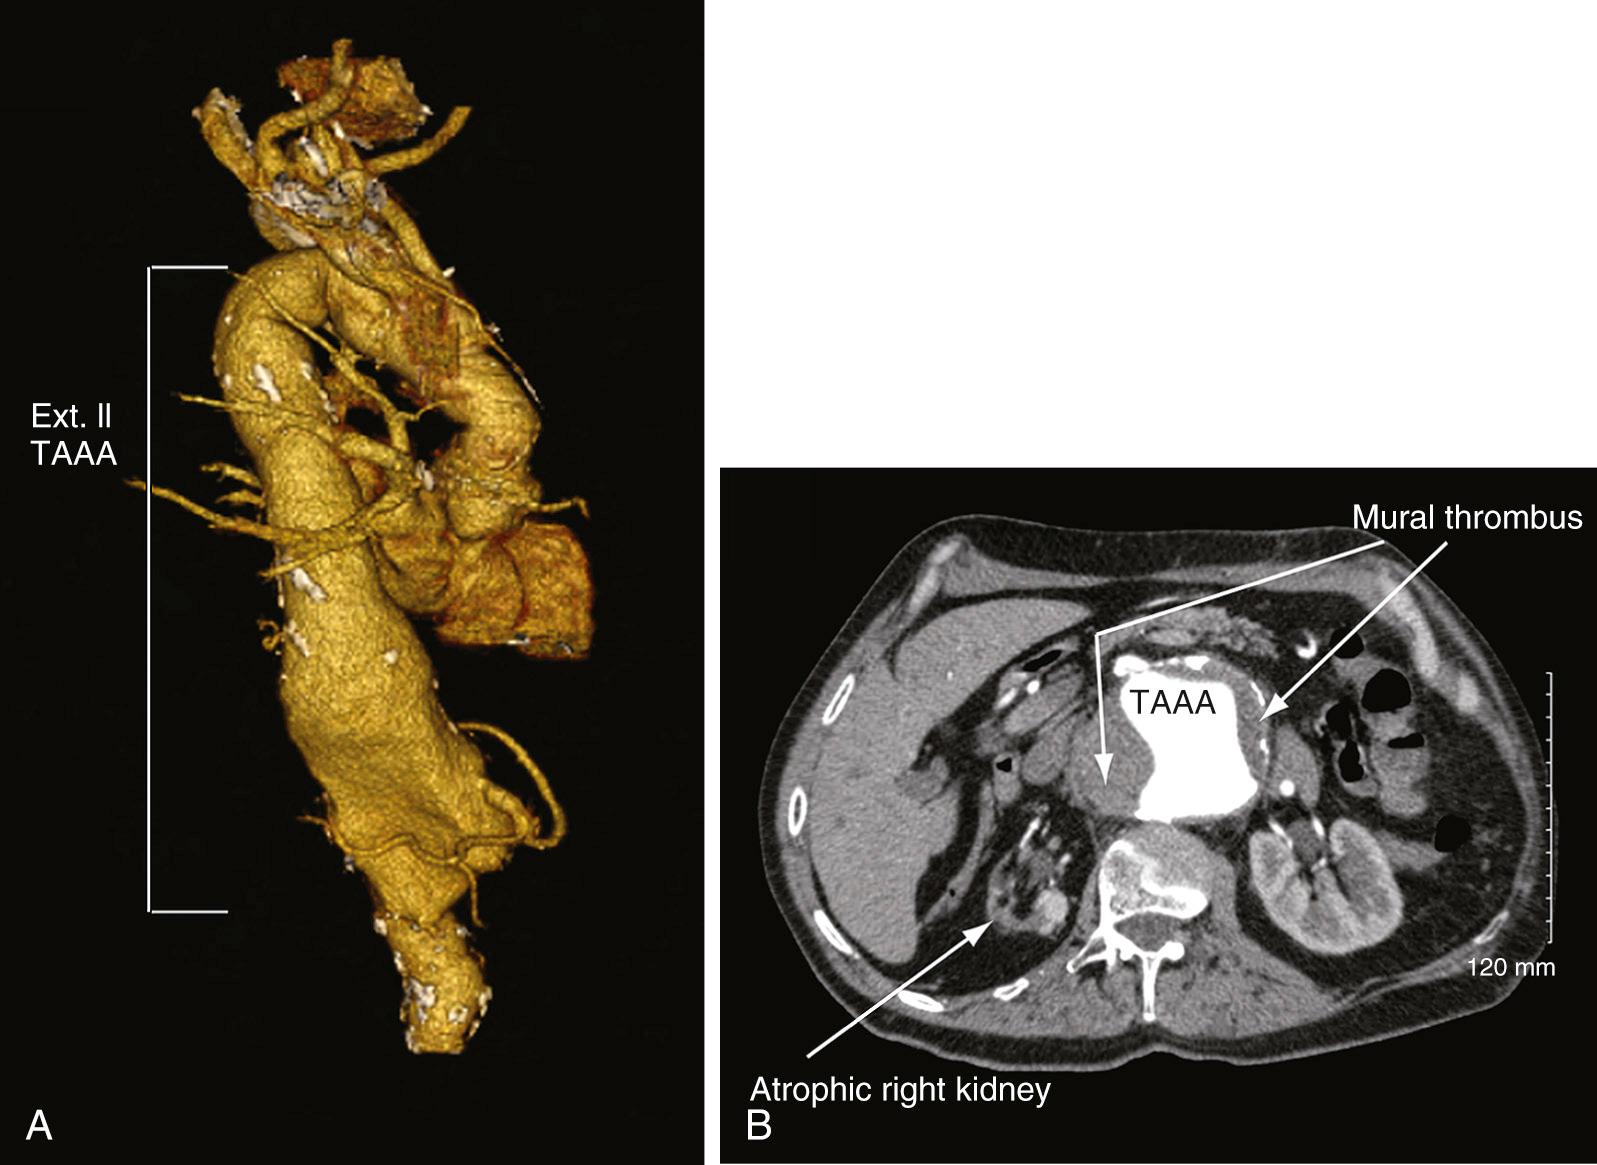 FIGURE 69-7, Three-dimensional reconstruction (A) and axial contrast-enhanced computed tomographic image (B) of a thoracoabdominal aortic aneurysm (TAAA). Note that the aneurysm is lined with thrombus and that the right kidney is severely atrophic (arrows).